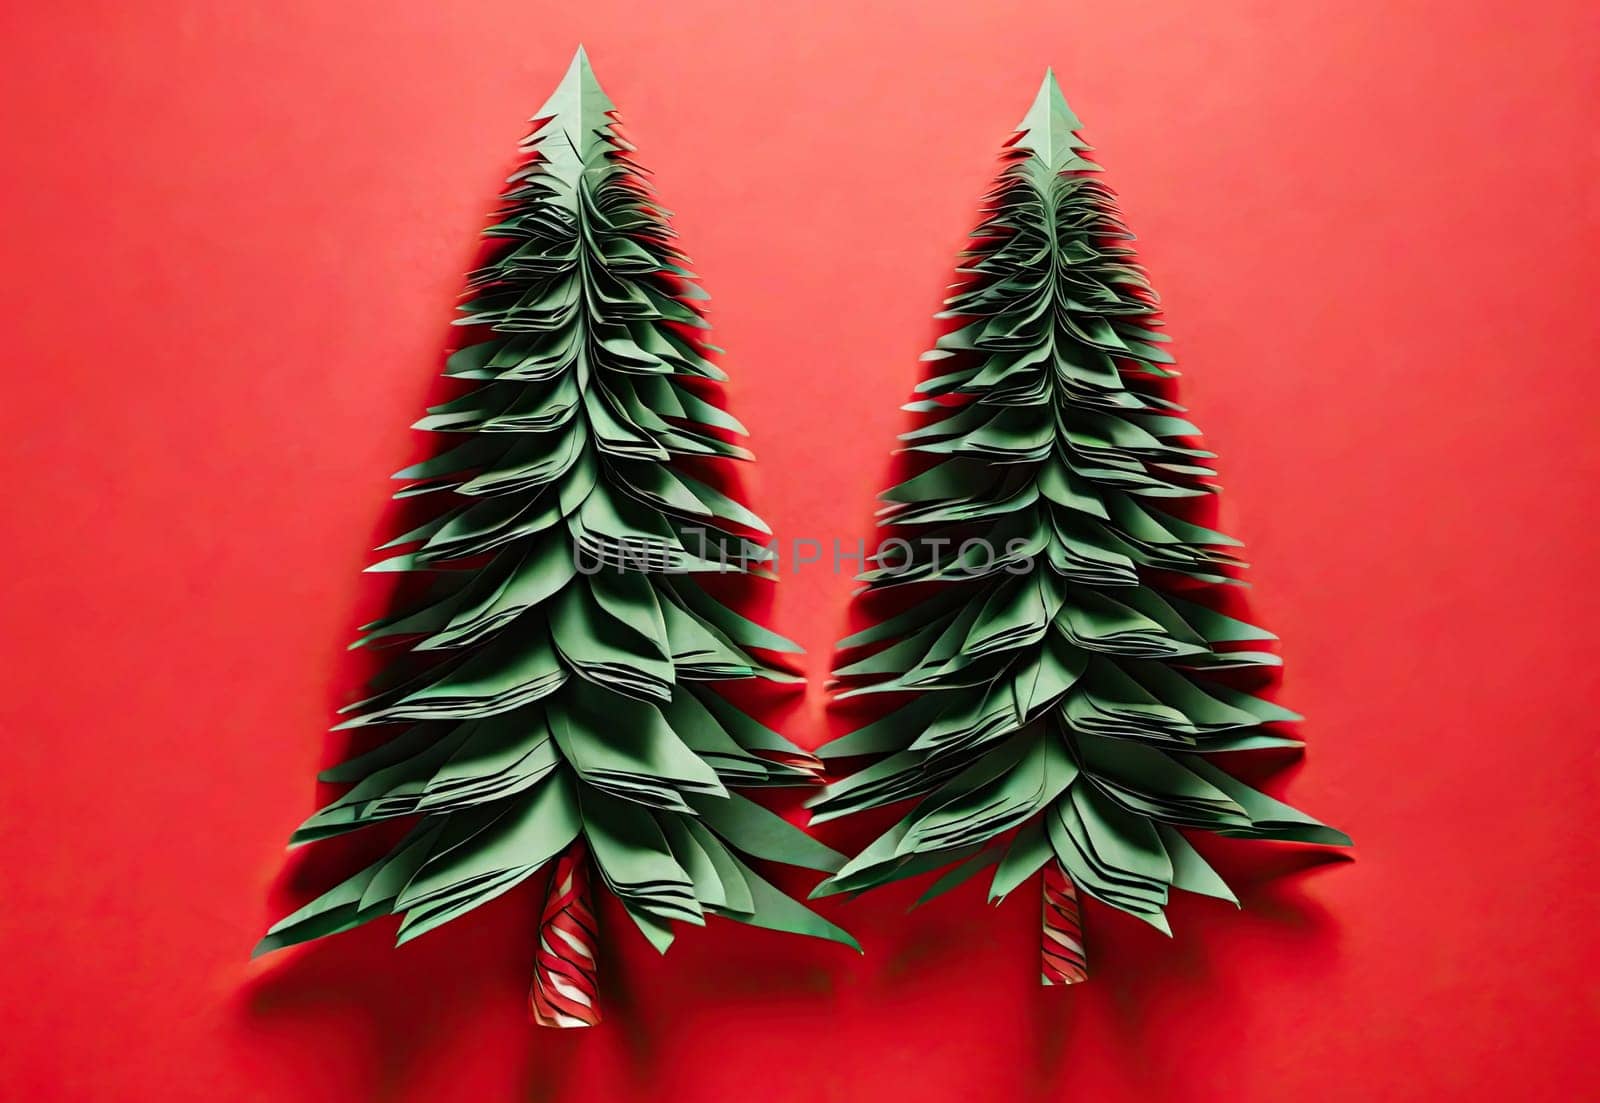 Christmas trees made of paper on red background